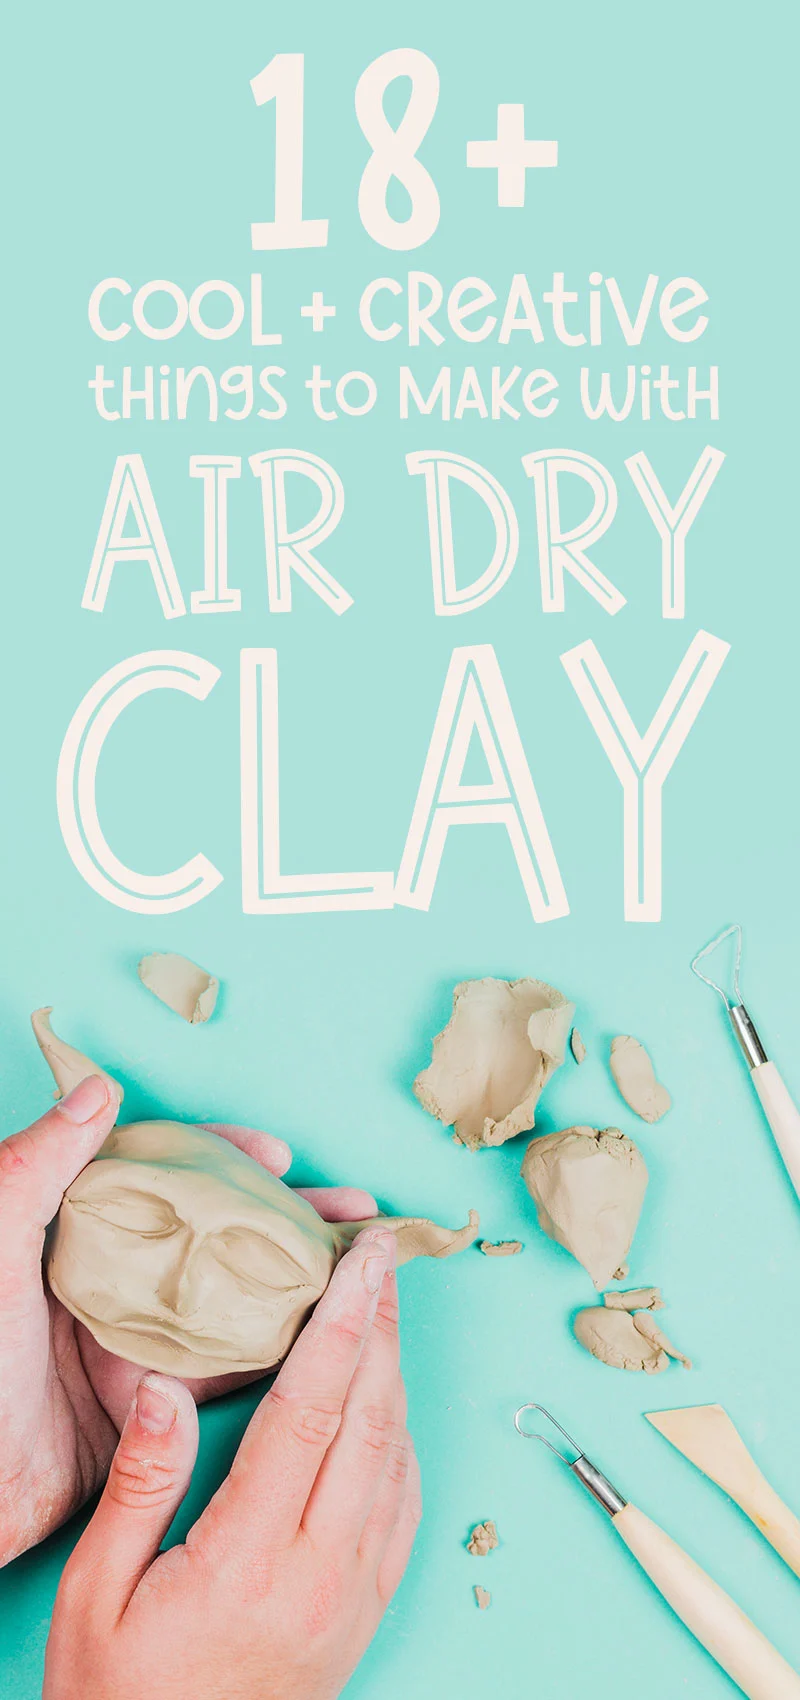 Things to make with air drying clay - hands working with clay and carving tools with title text